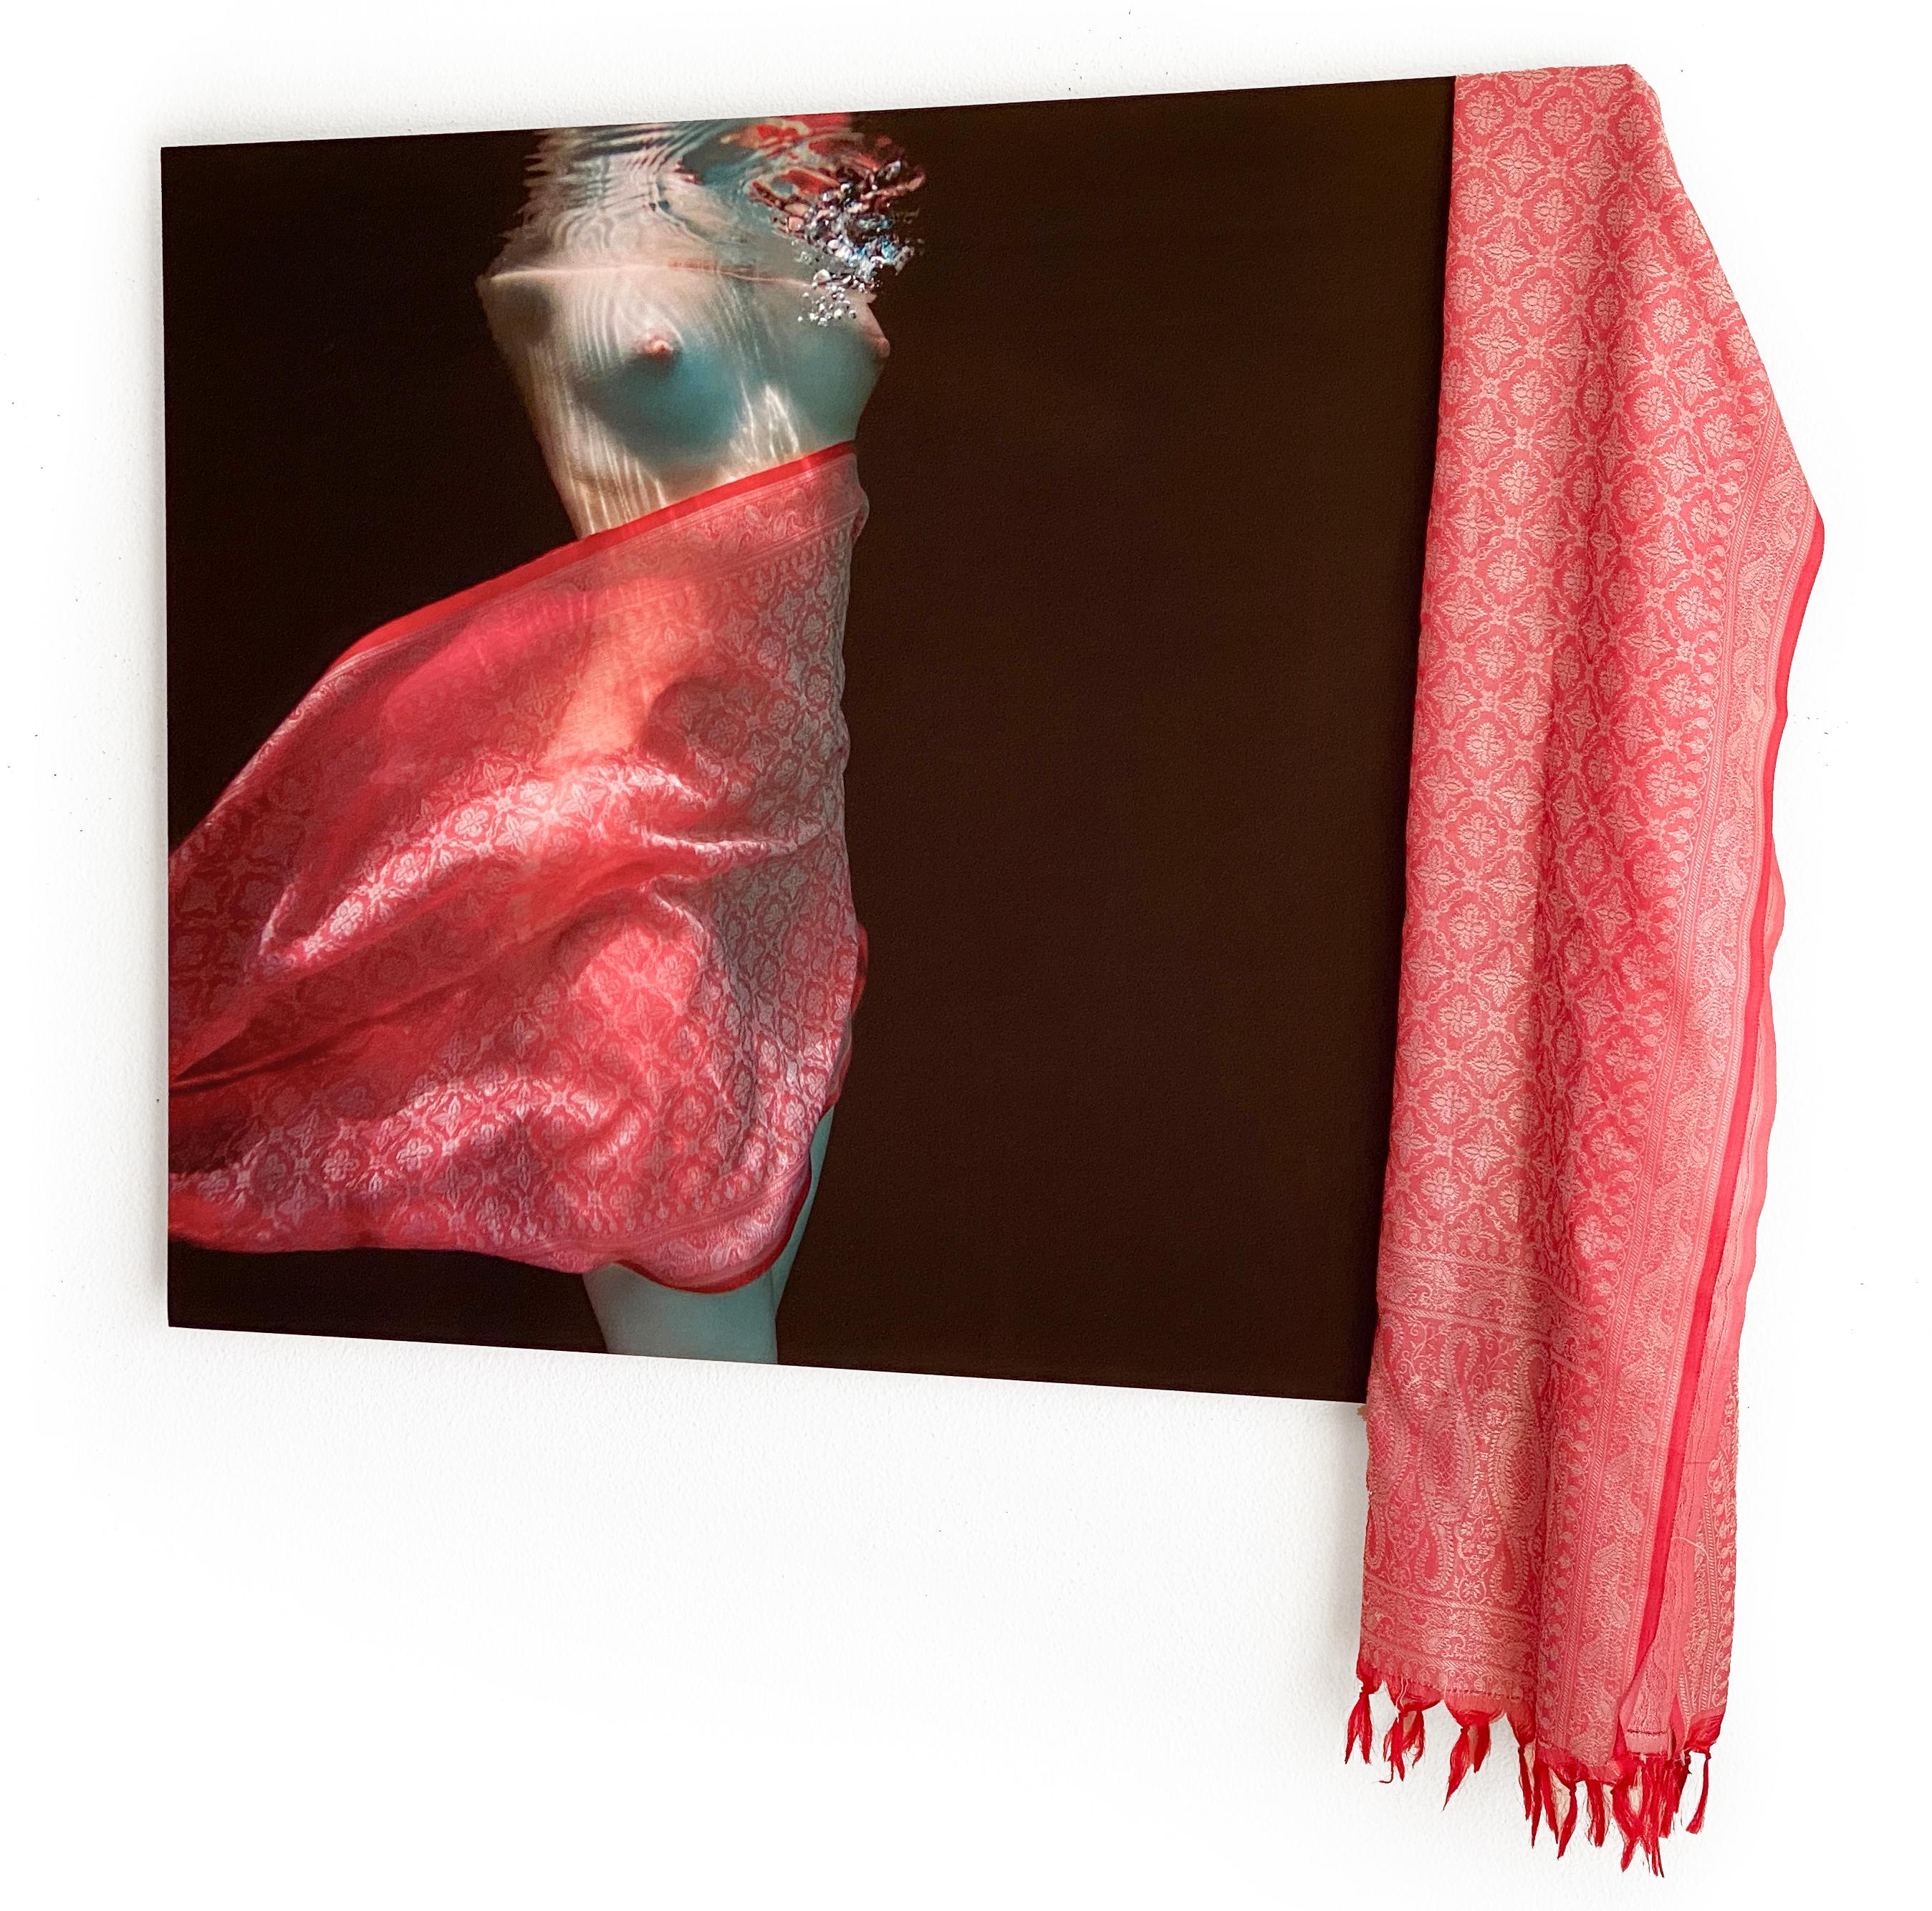 Alex Sher Figurative Photograph - Indian Scarf  - underwater nude photograph - print on aluminum - with the scarf